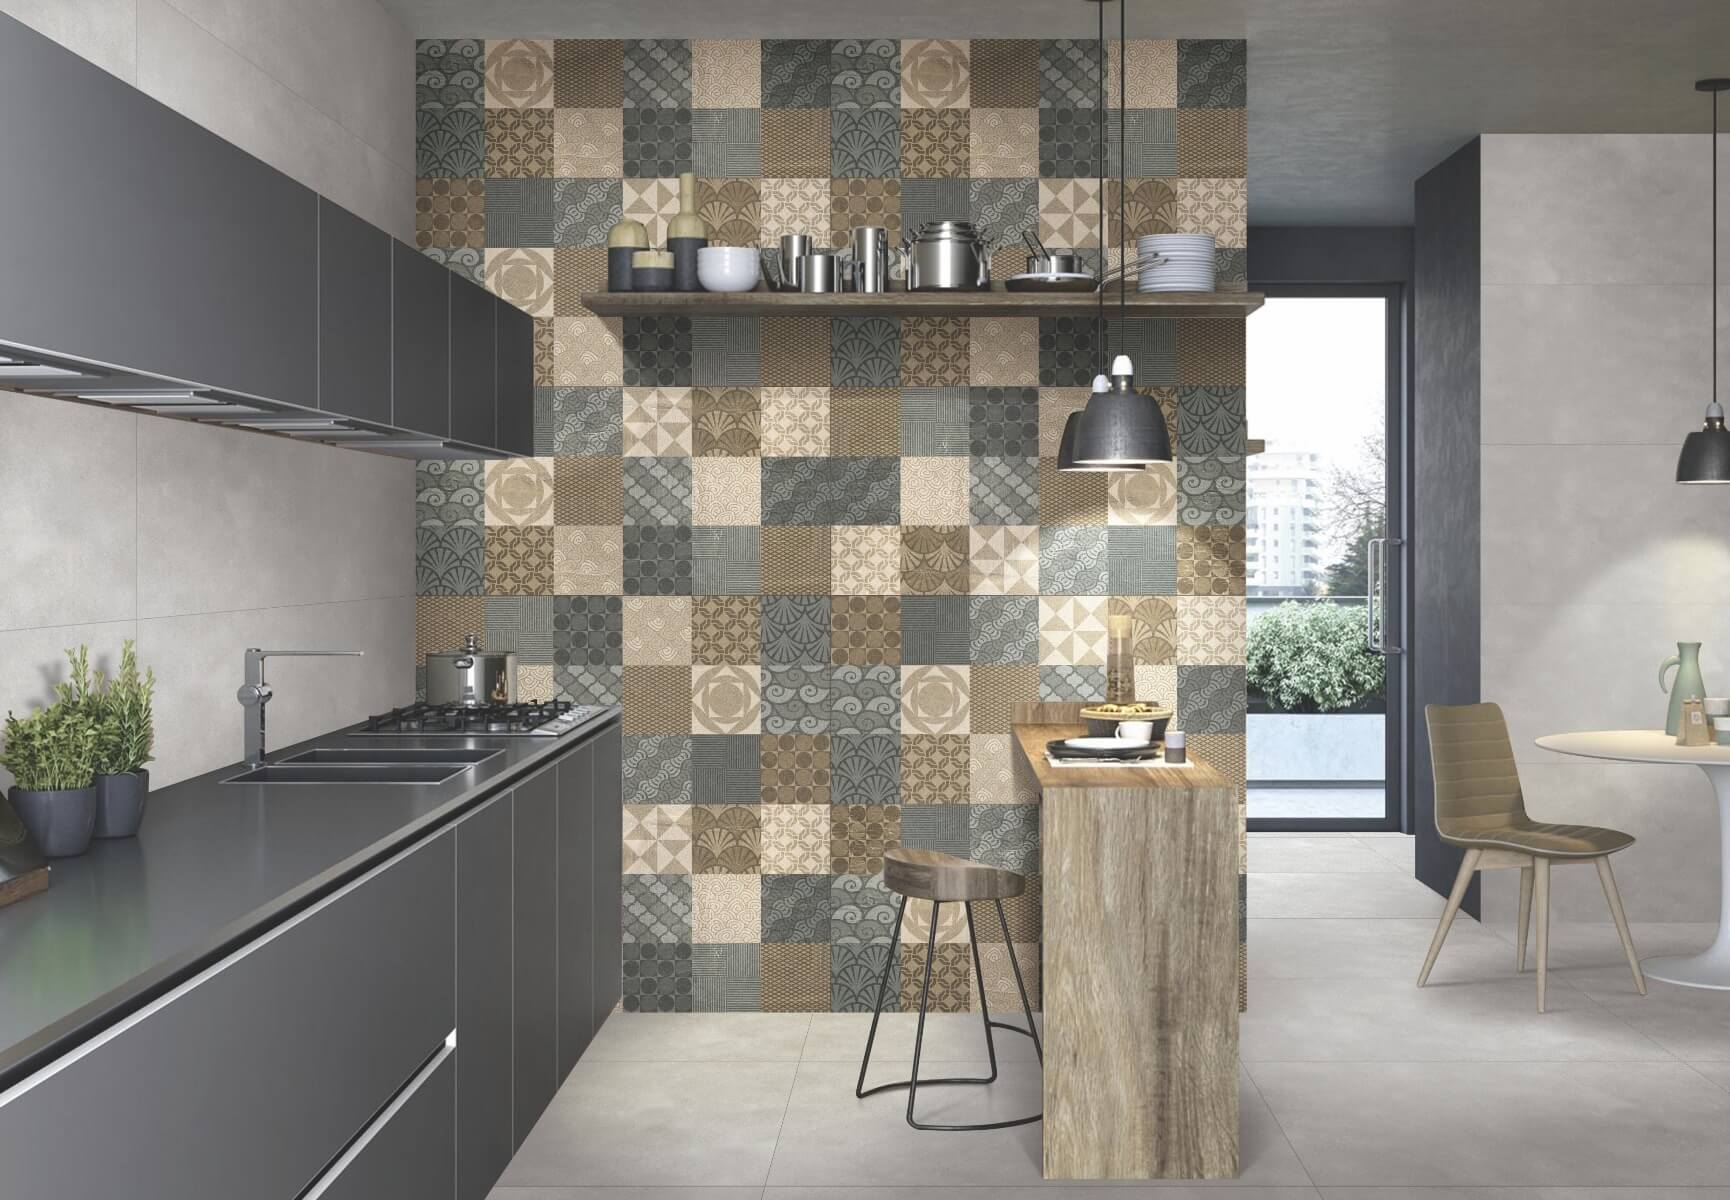 Stylized Tiles for Accent Tiles